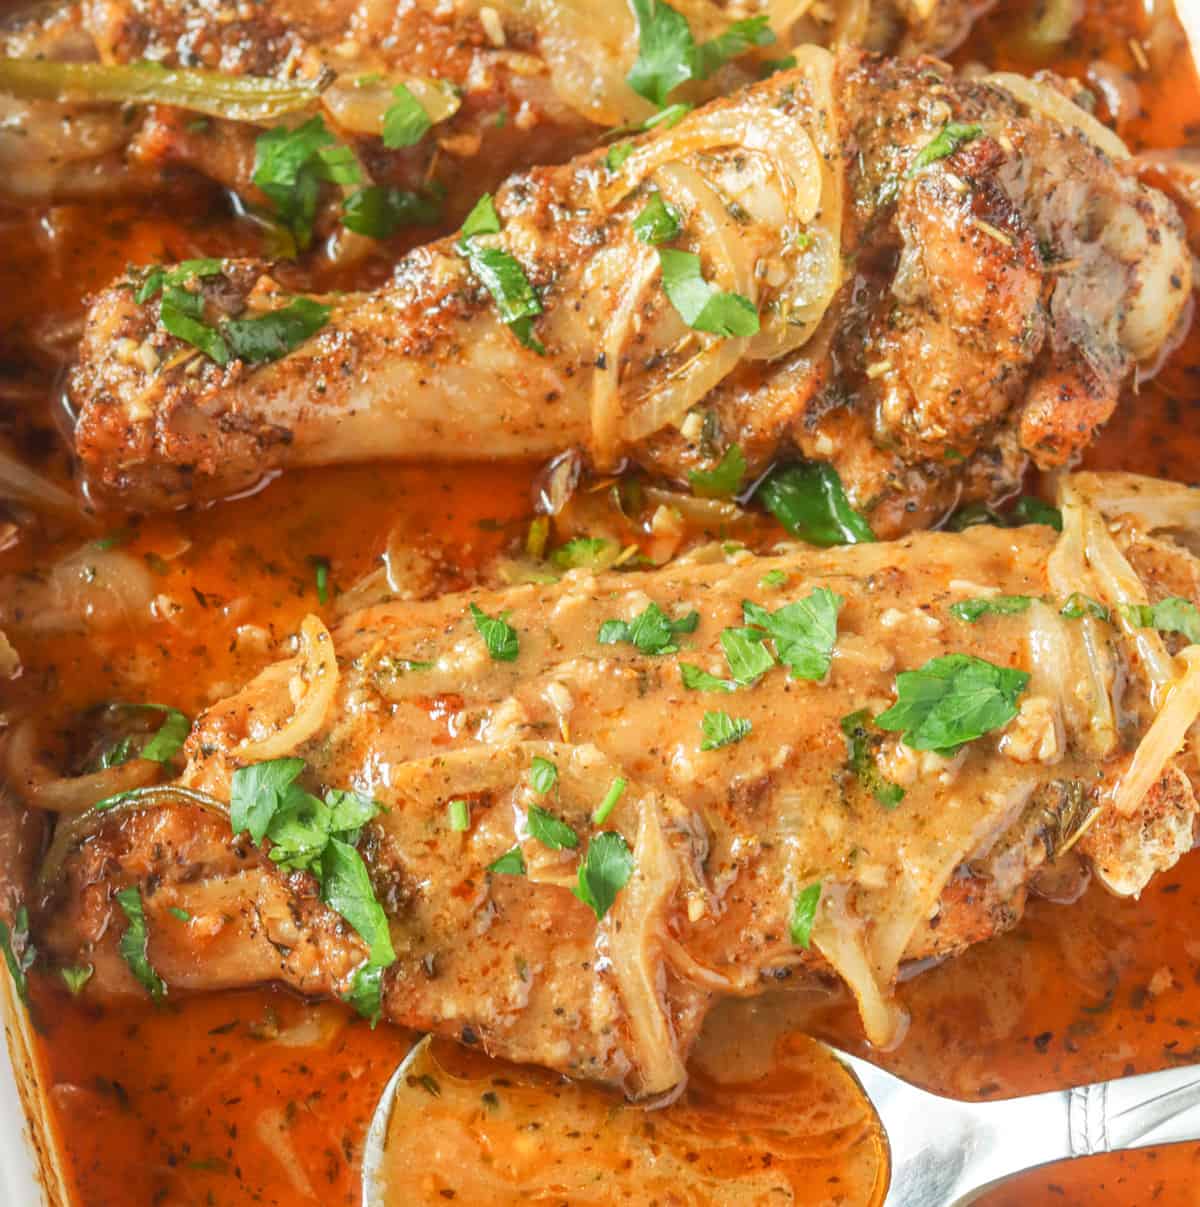 Serving up drool-worthy smothered turkey wings and spooning up the gravy